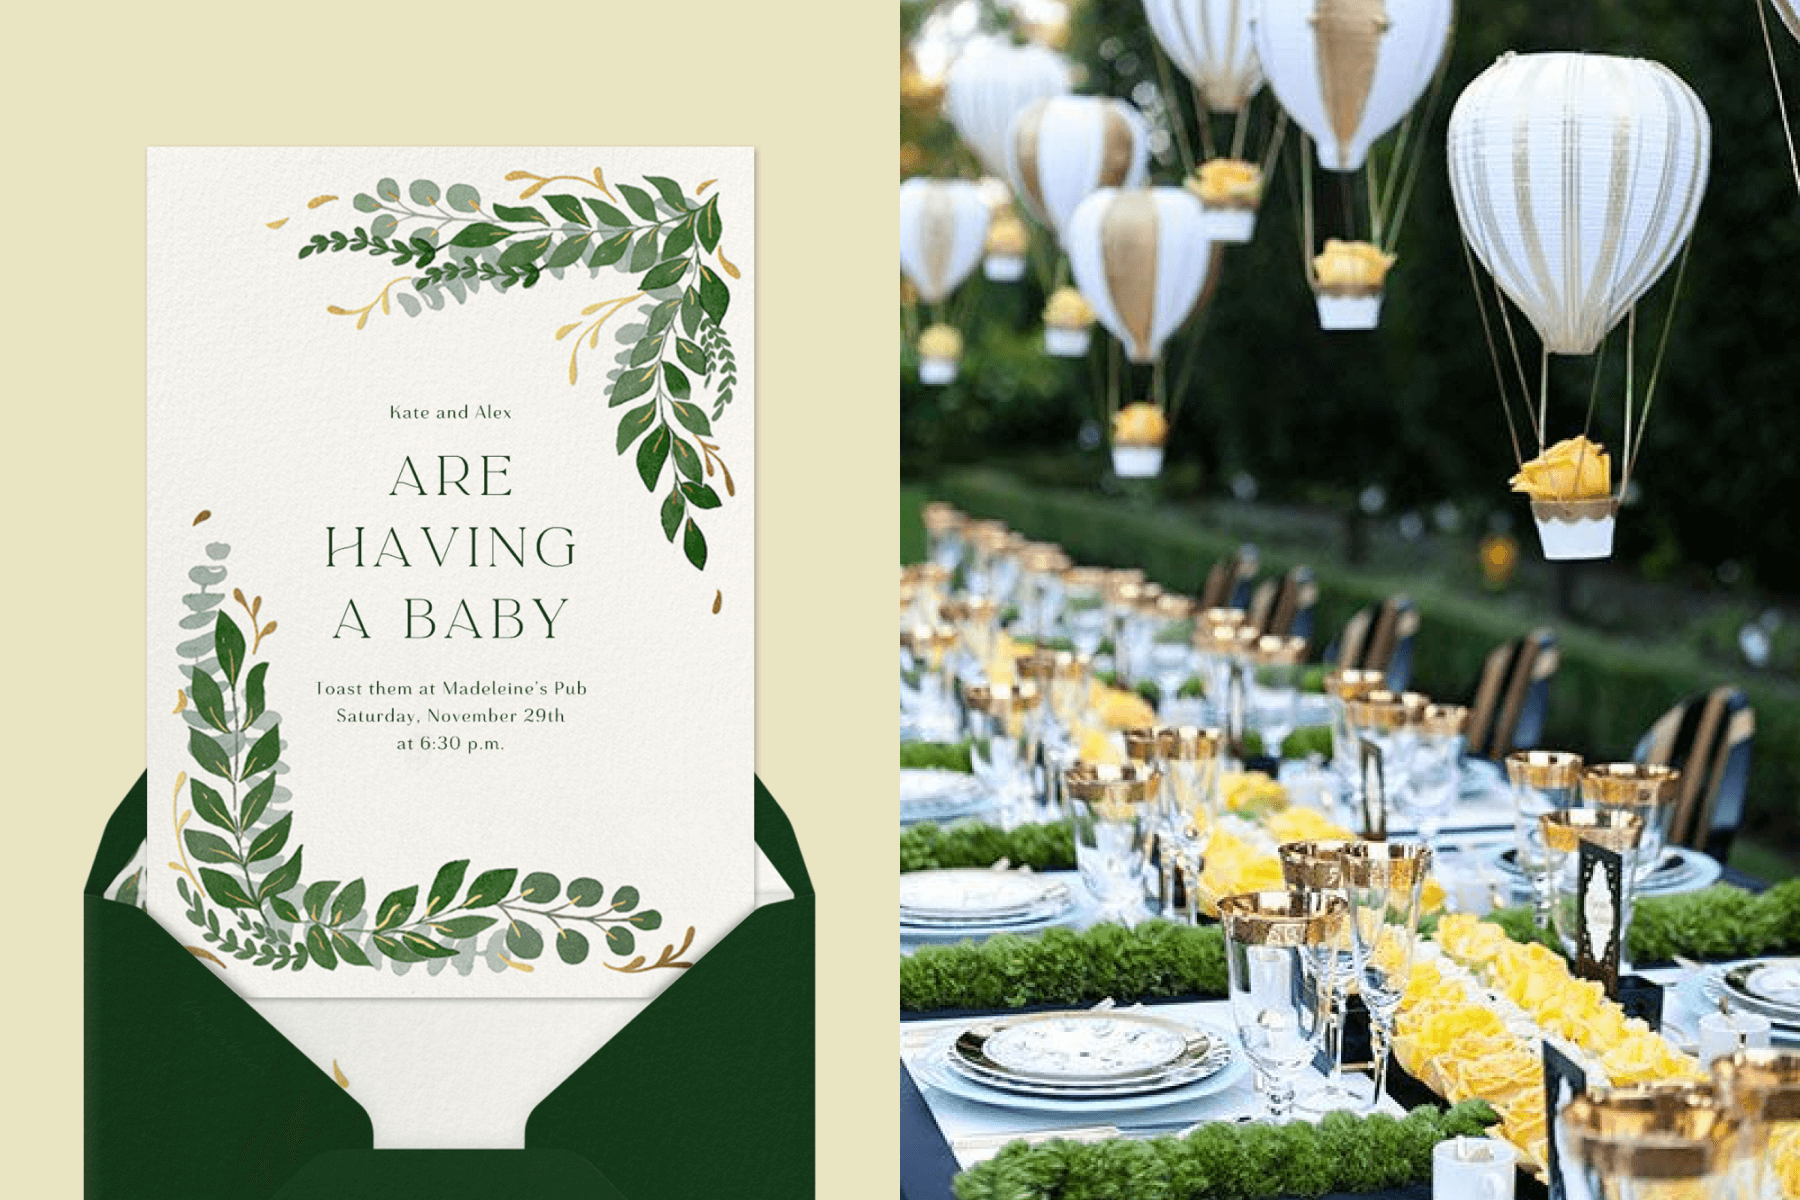 Left: A baby shower invitation with greenery illustrations; Right: A baby shower table setting with greenery, yellow roses, and hot air balloon decor.